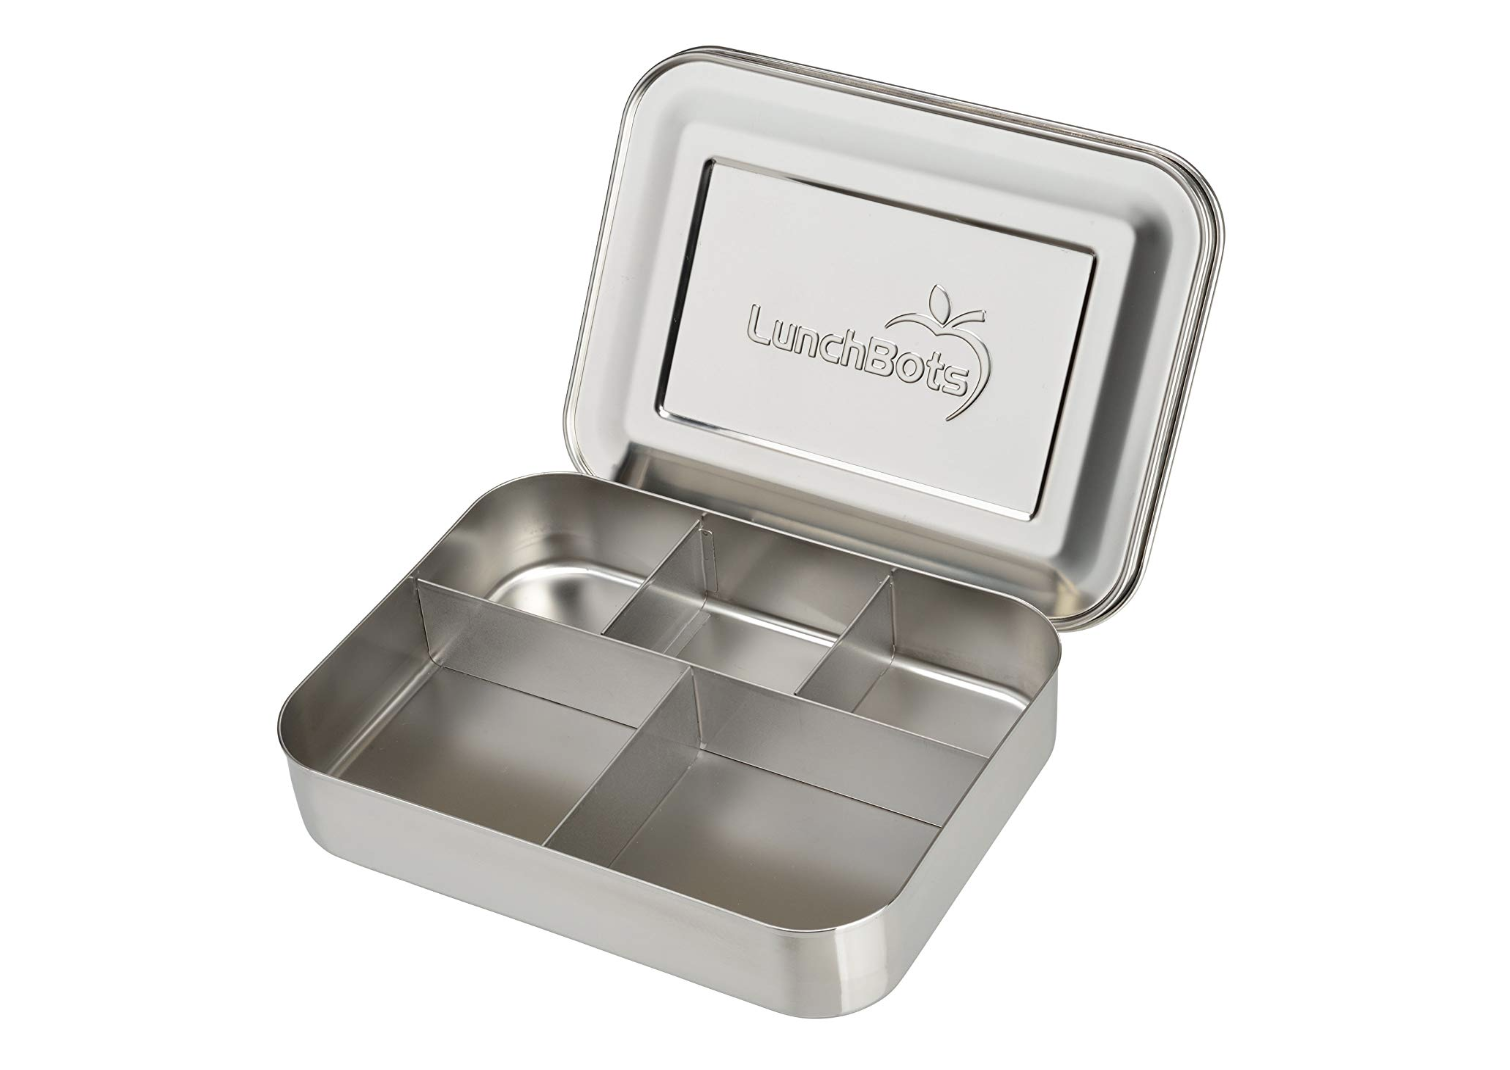 LunchBots stainless steel lunch container- college kitchen essentials 